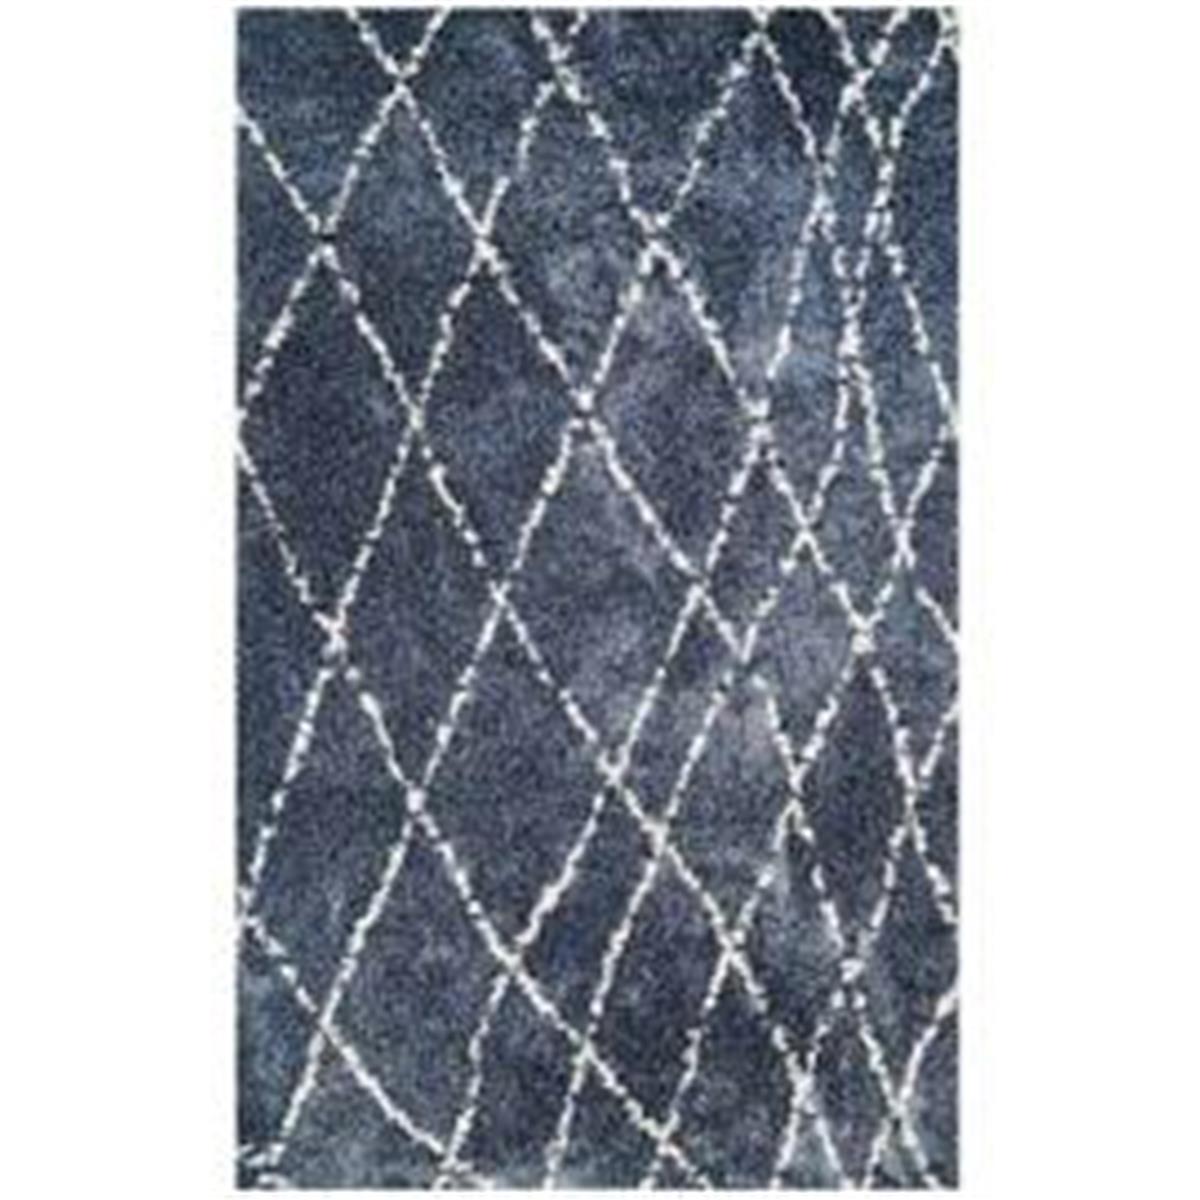 43170106053076t 5 Ft. 3 In. X 7 Ft. 6 In. Bromley Whistler Rug, Blue & Snow